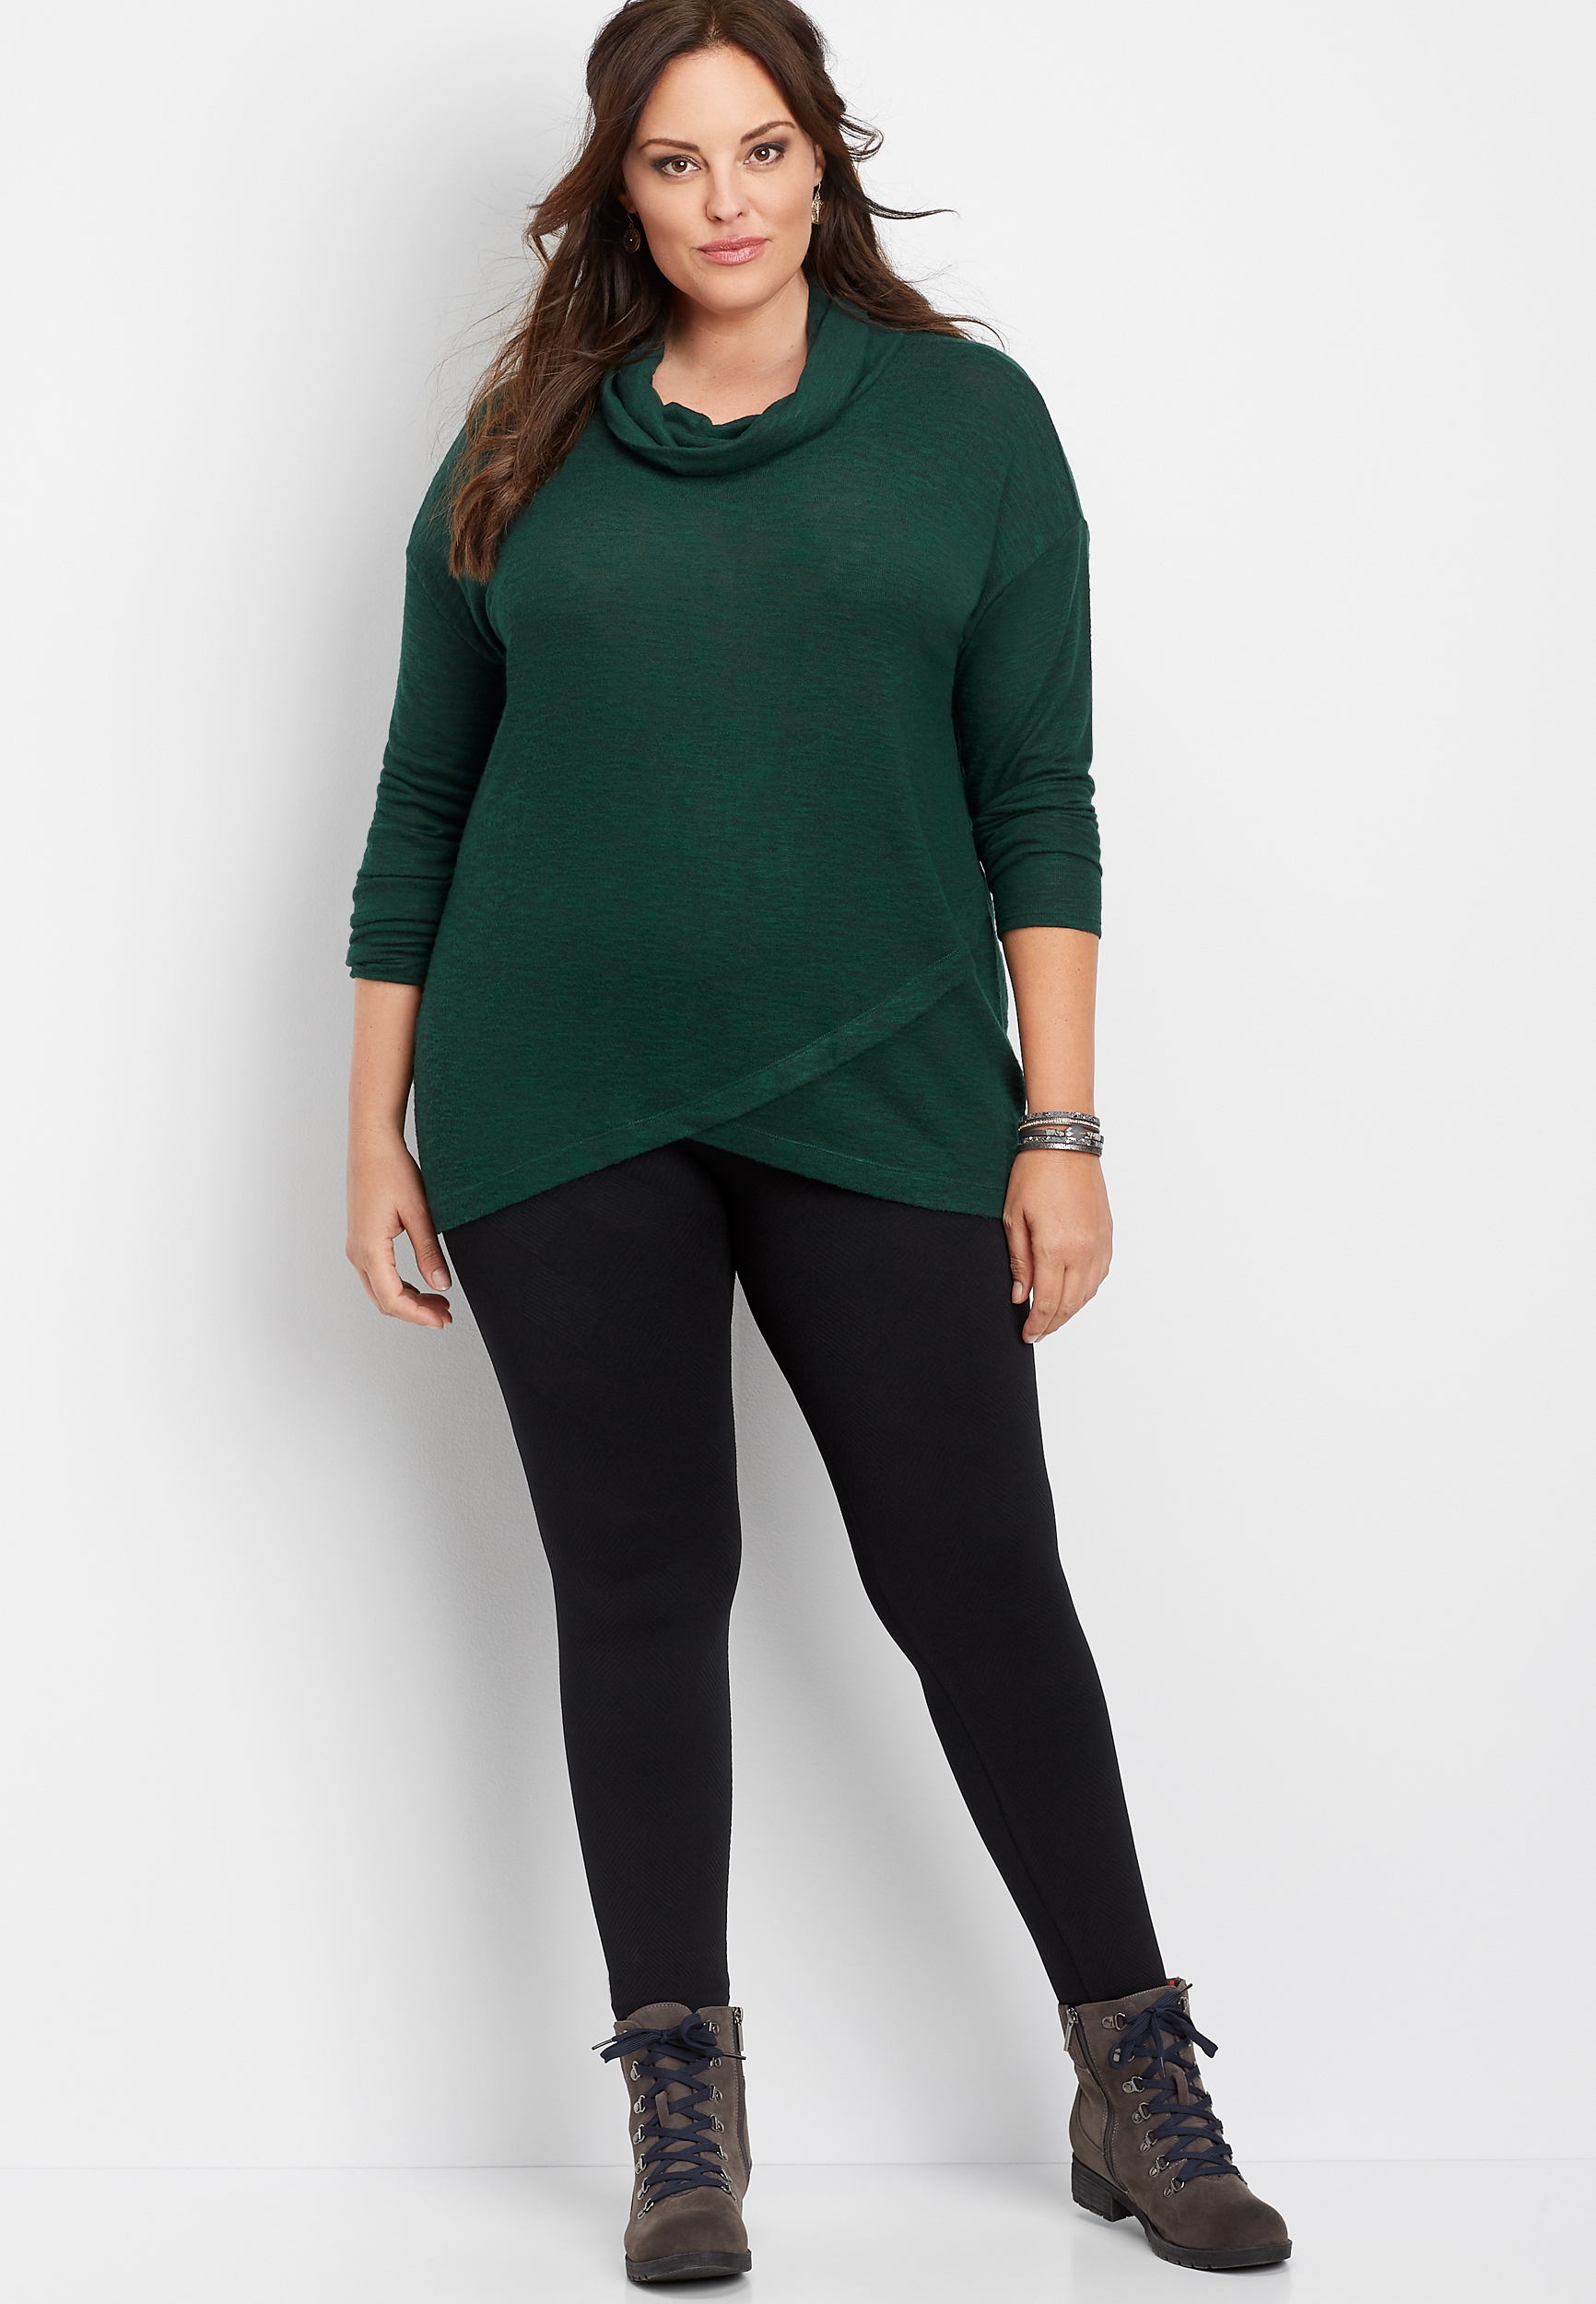 Flannel Lined Leggings Plus Size Tops For Women  International Society of  Precision Agriculture